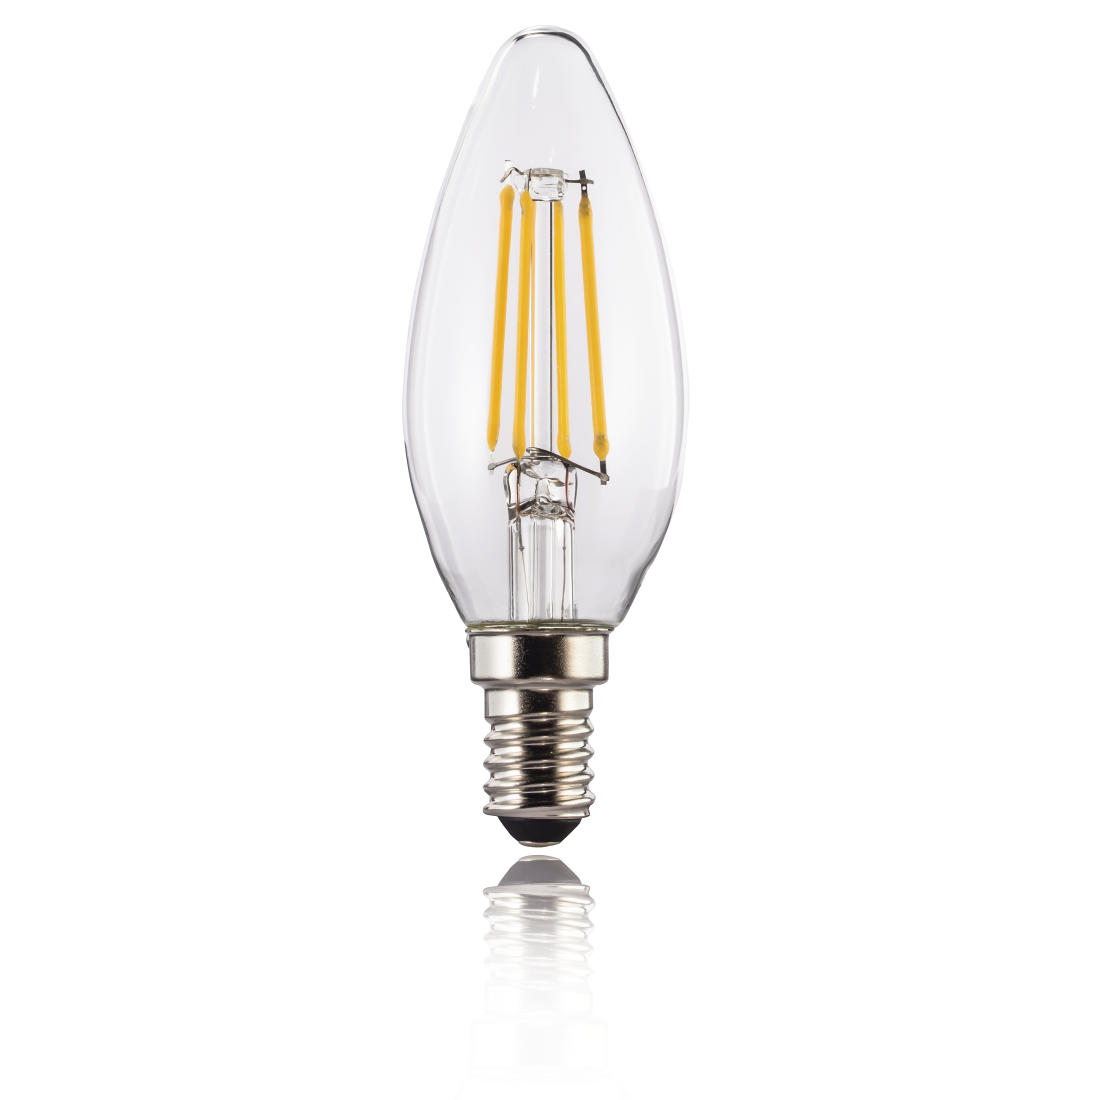 abx2 High-Res Image 2 - Xavax, LED Filament, E14, 470 lm Replaces 40 W, Candle Bulb, warm wh., cl., Dimm.